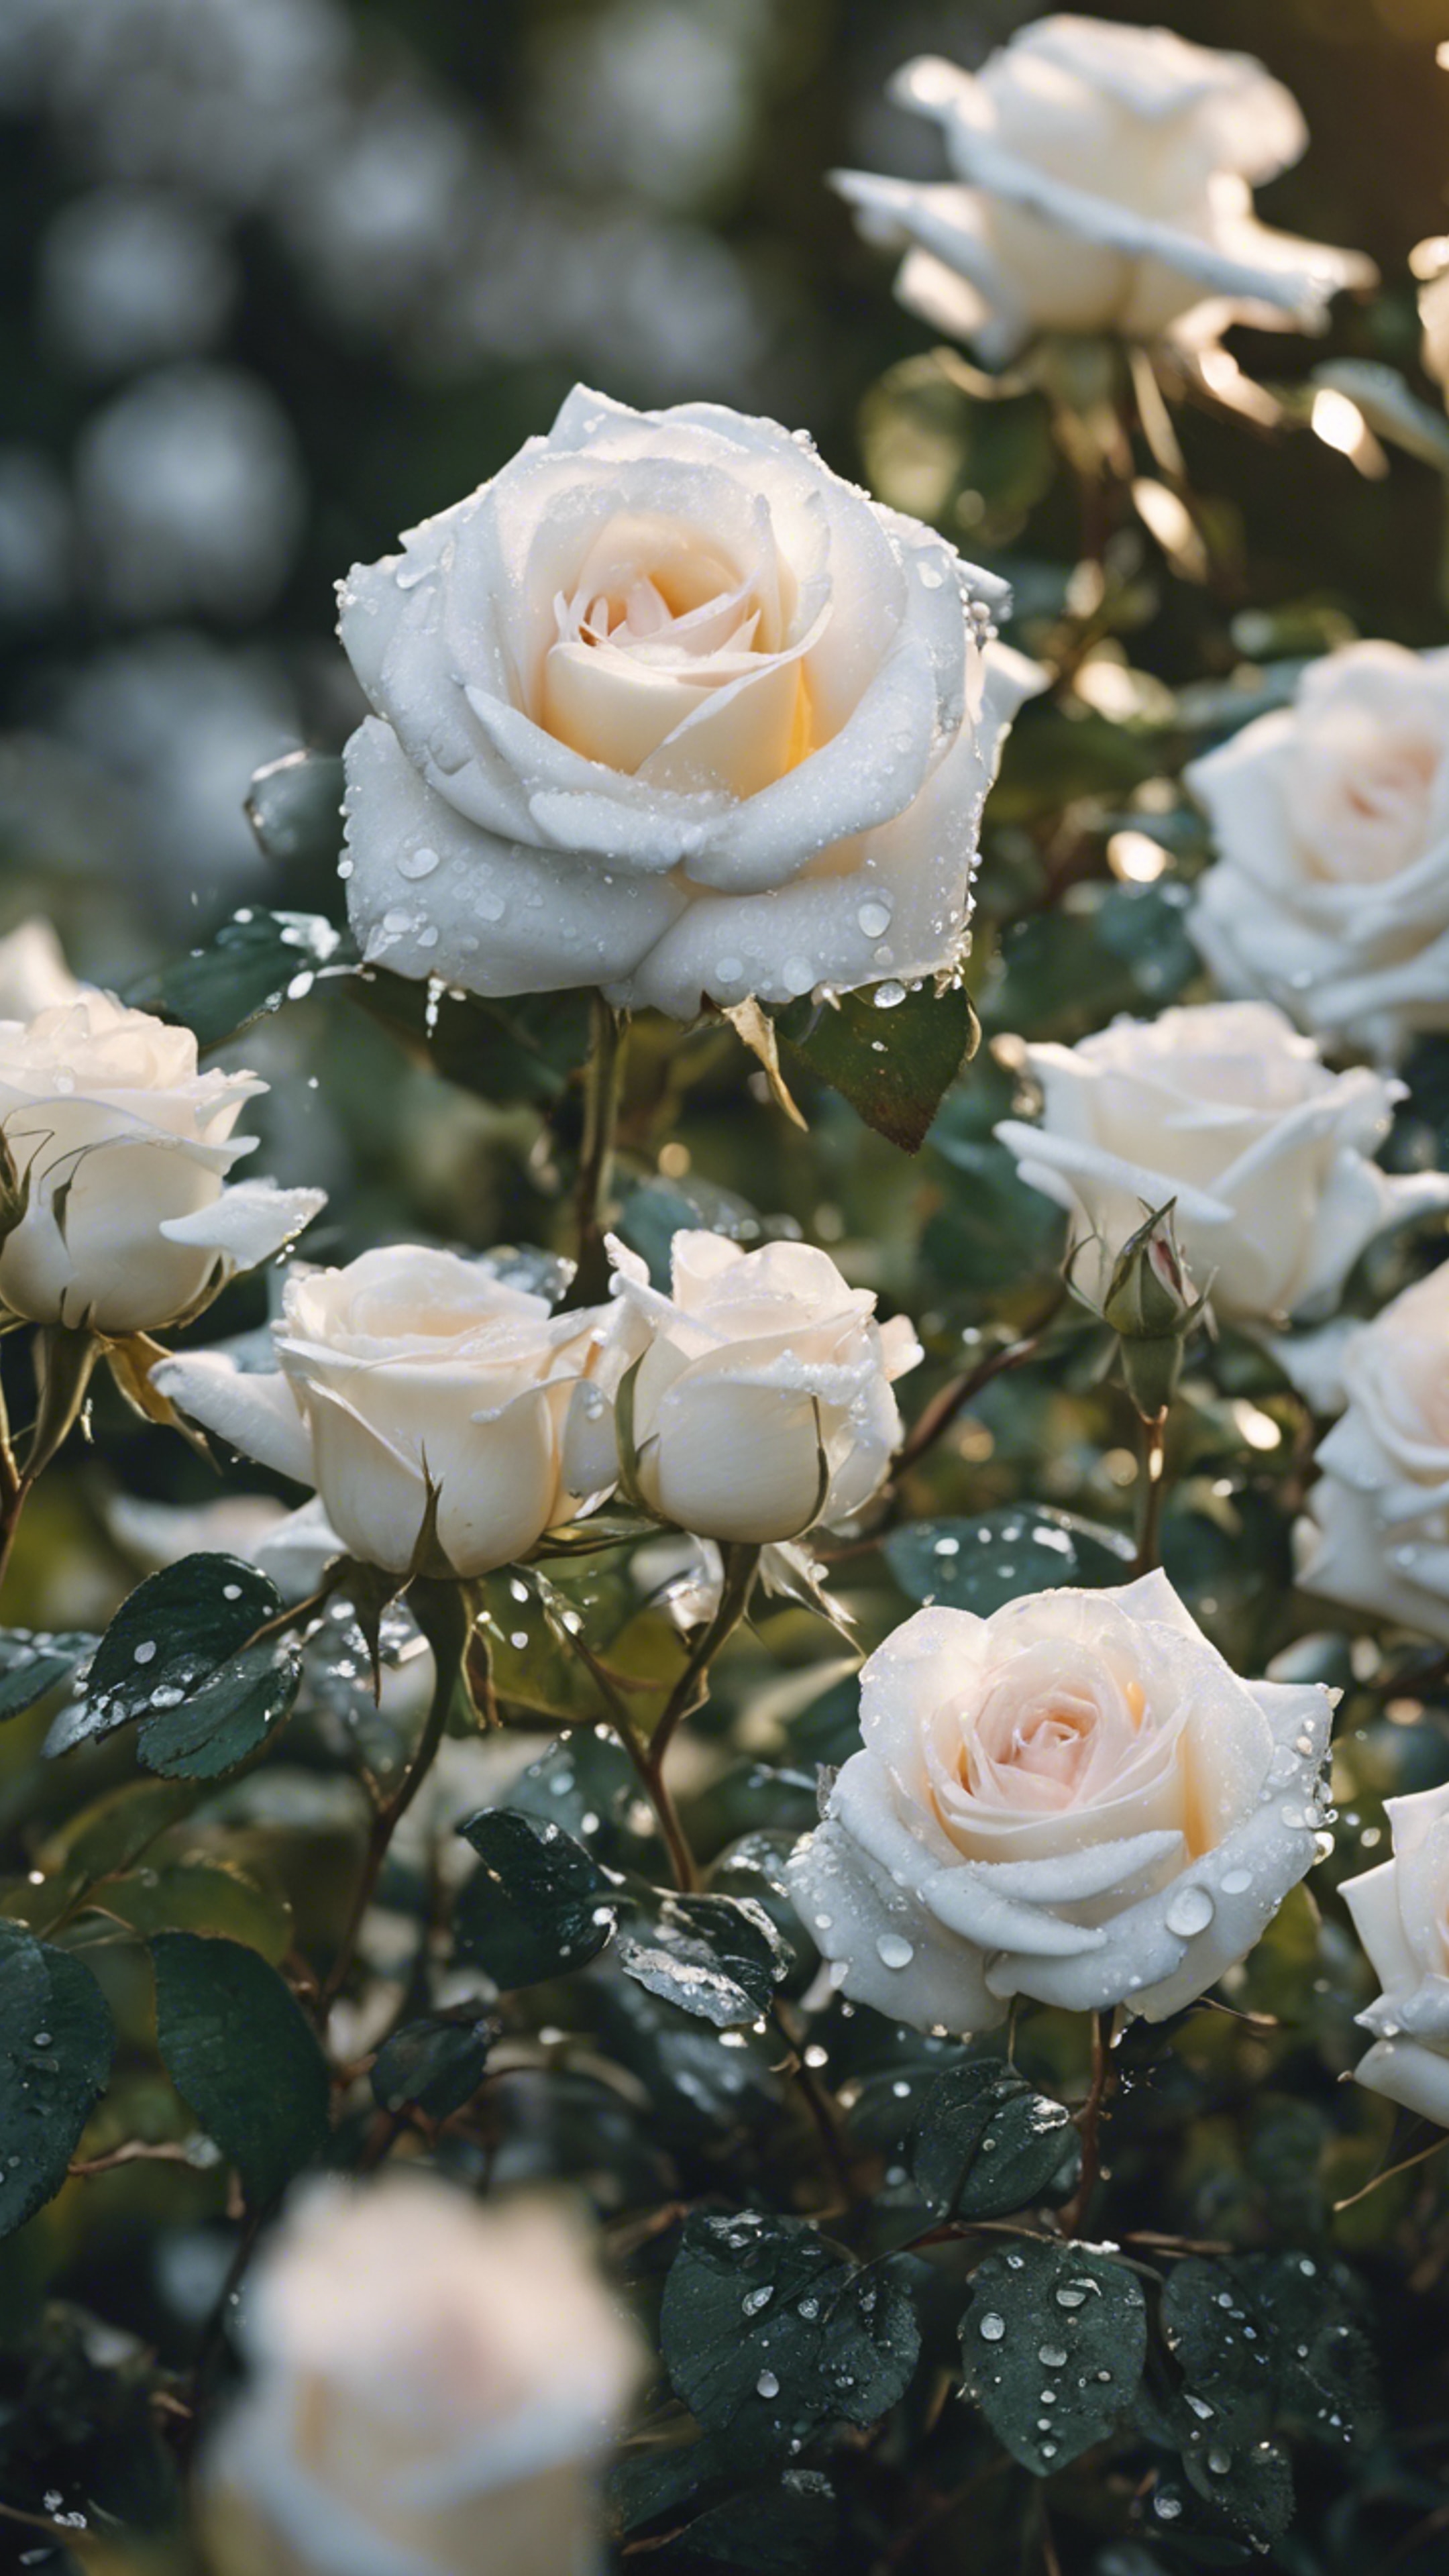 White roses covered in silver morning dew in a lush rose garden. Wallpaper[67c2c5bc62874412a2b6]